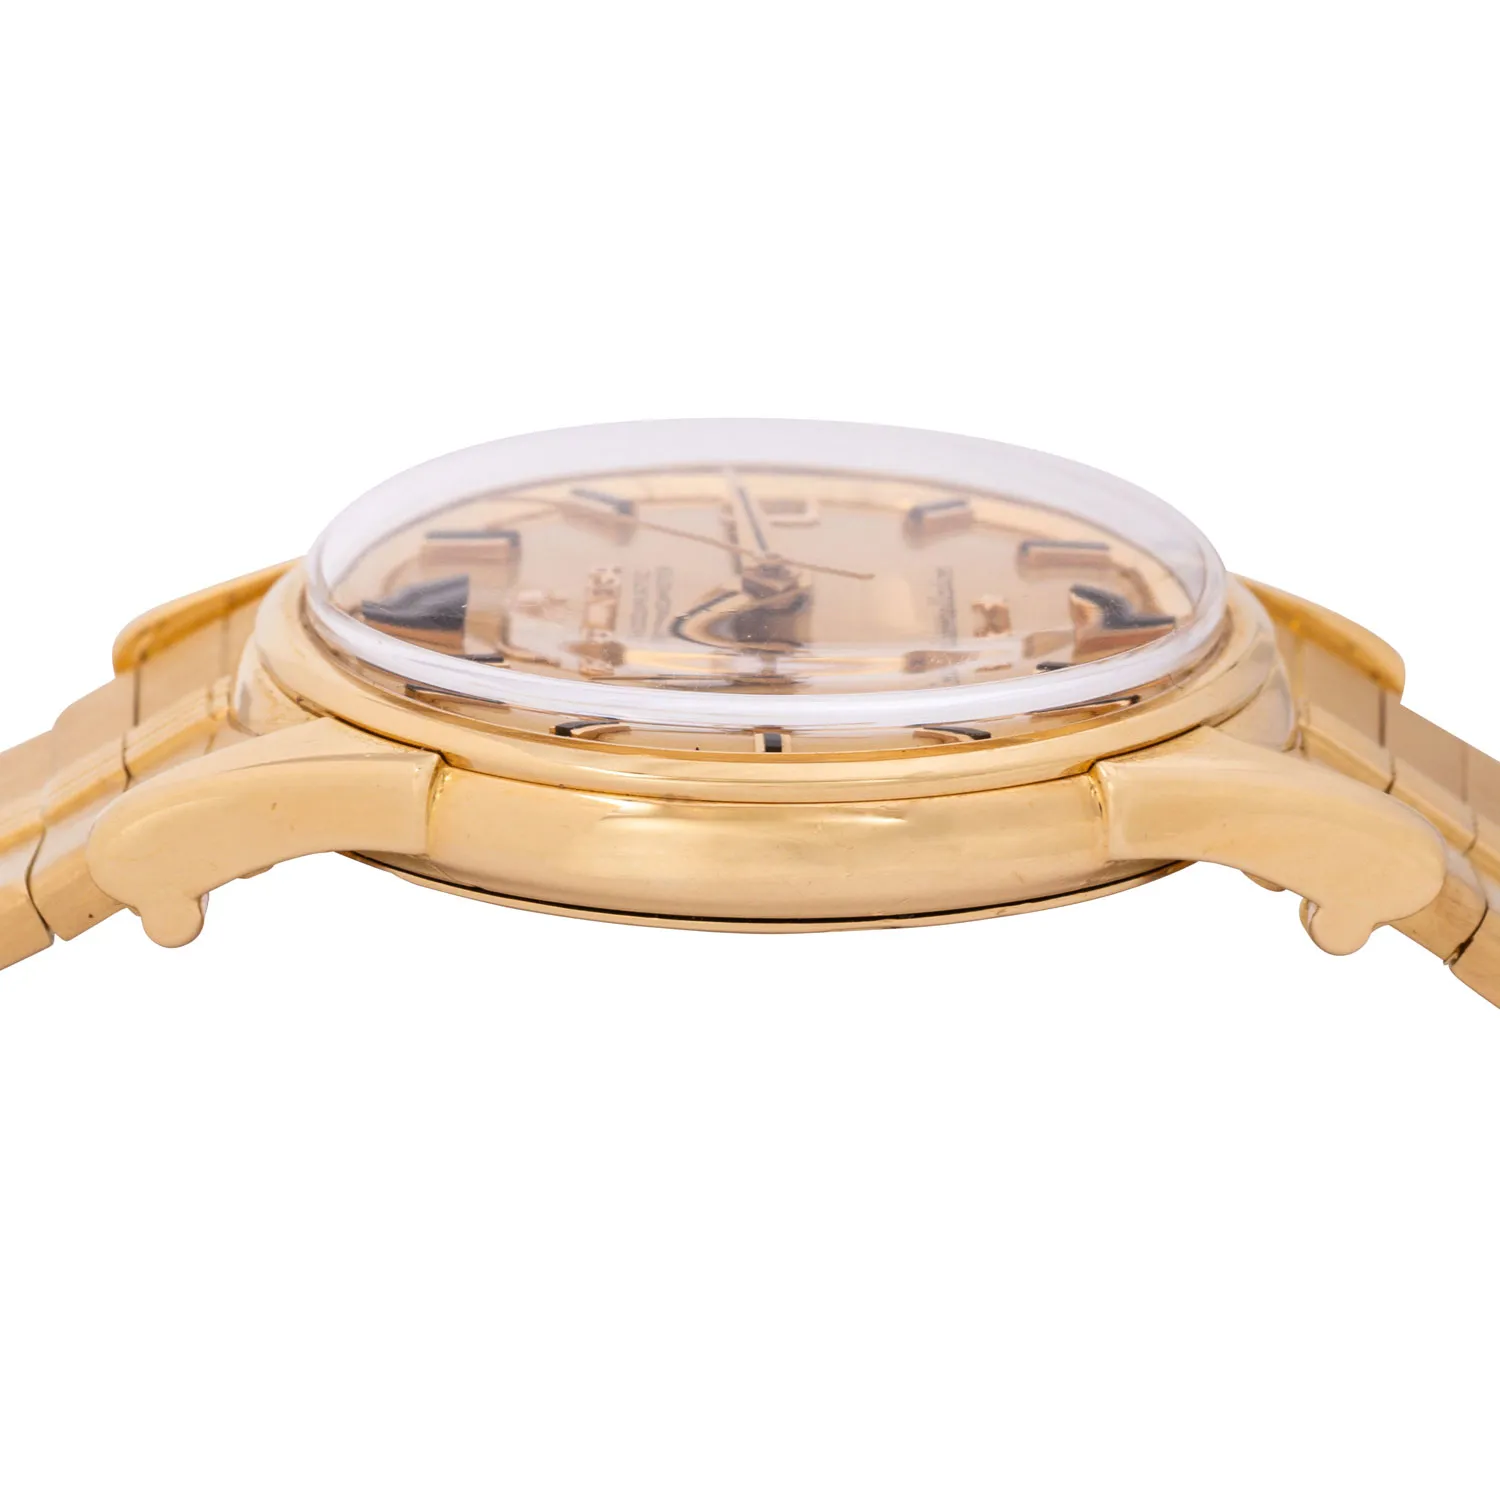 Omega Constellation 14393 35mm Yellow gold Gold 2